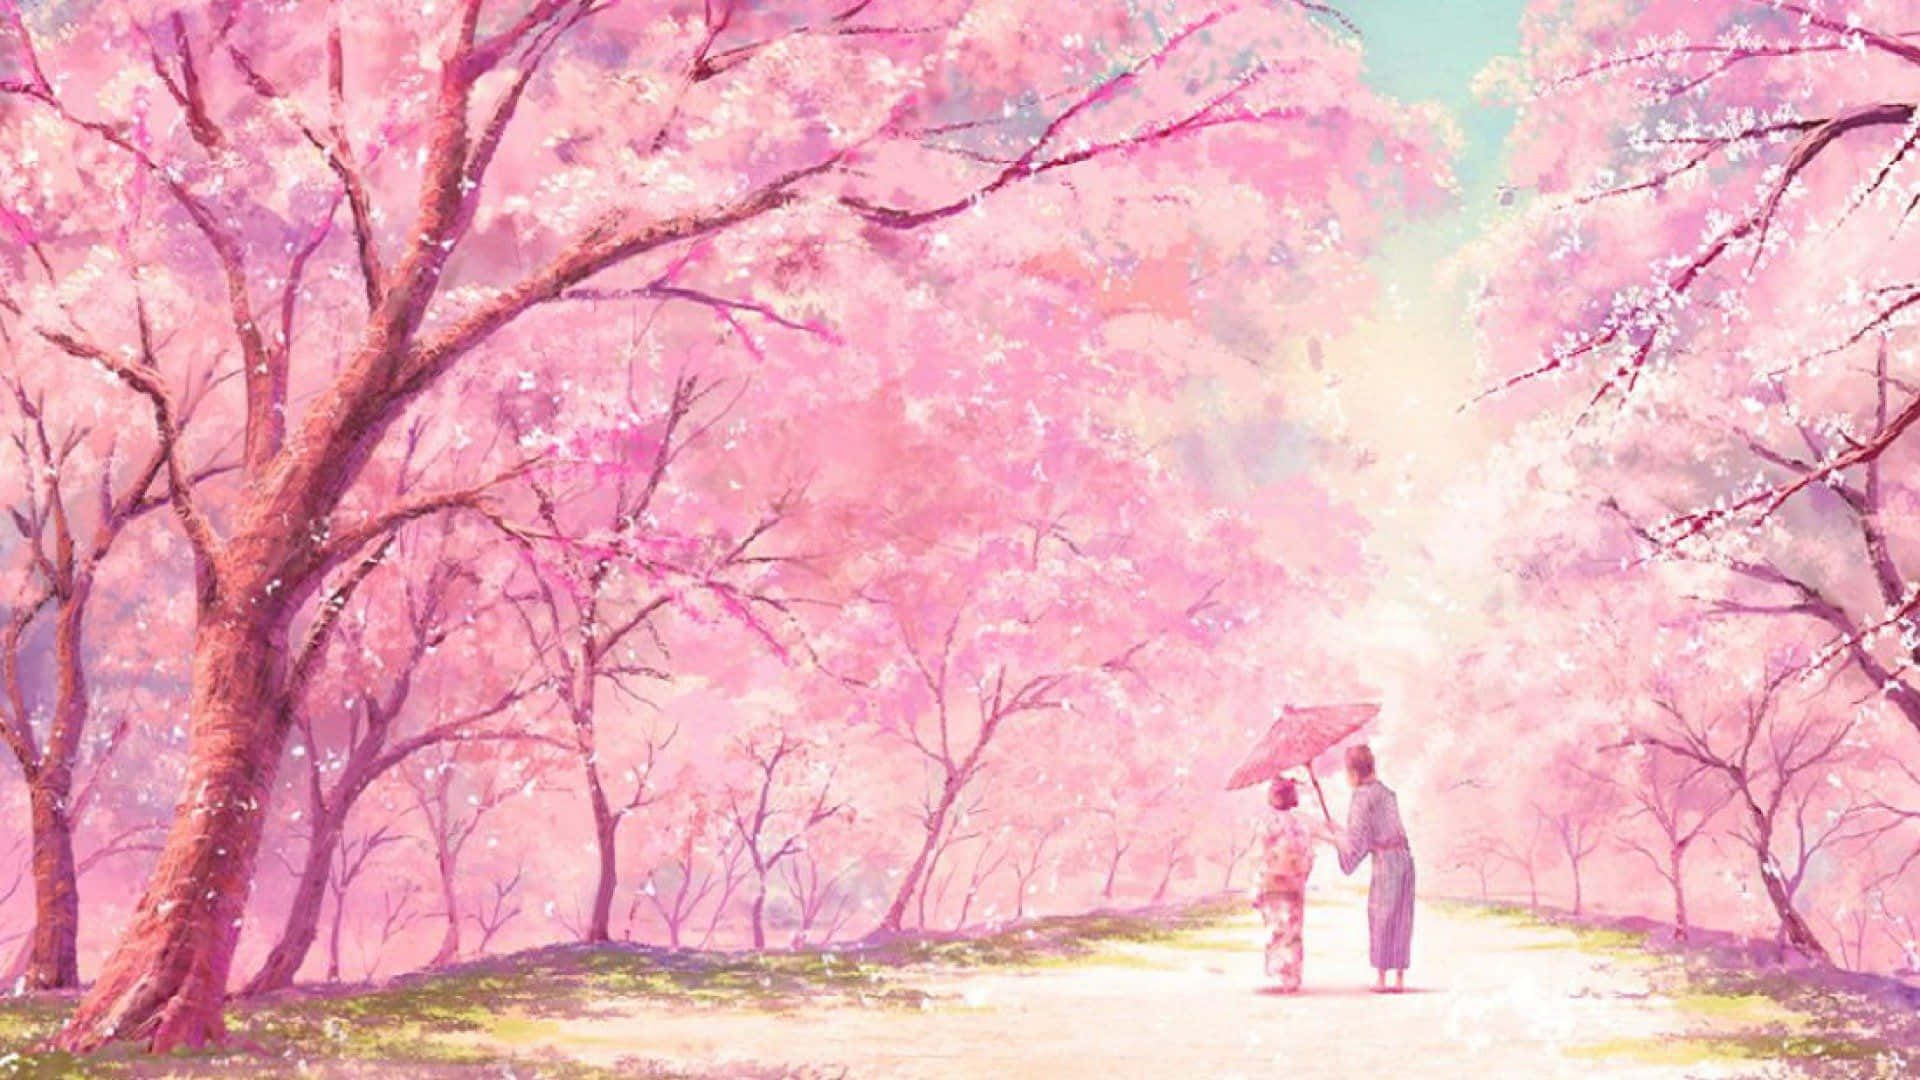 An anime girl in a dreamy pastel pink aesthetic. Wallpaper